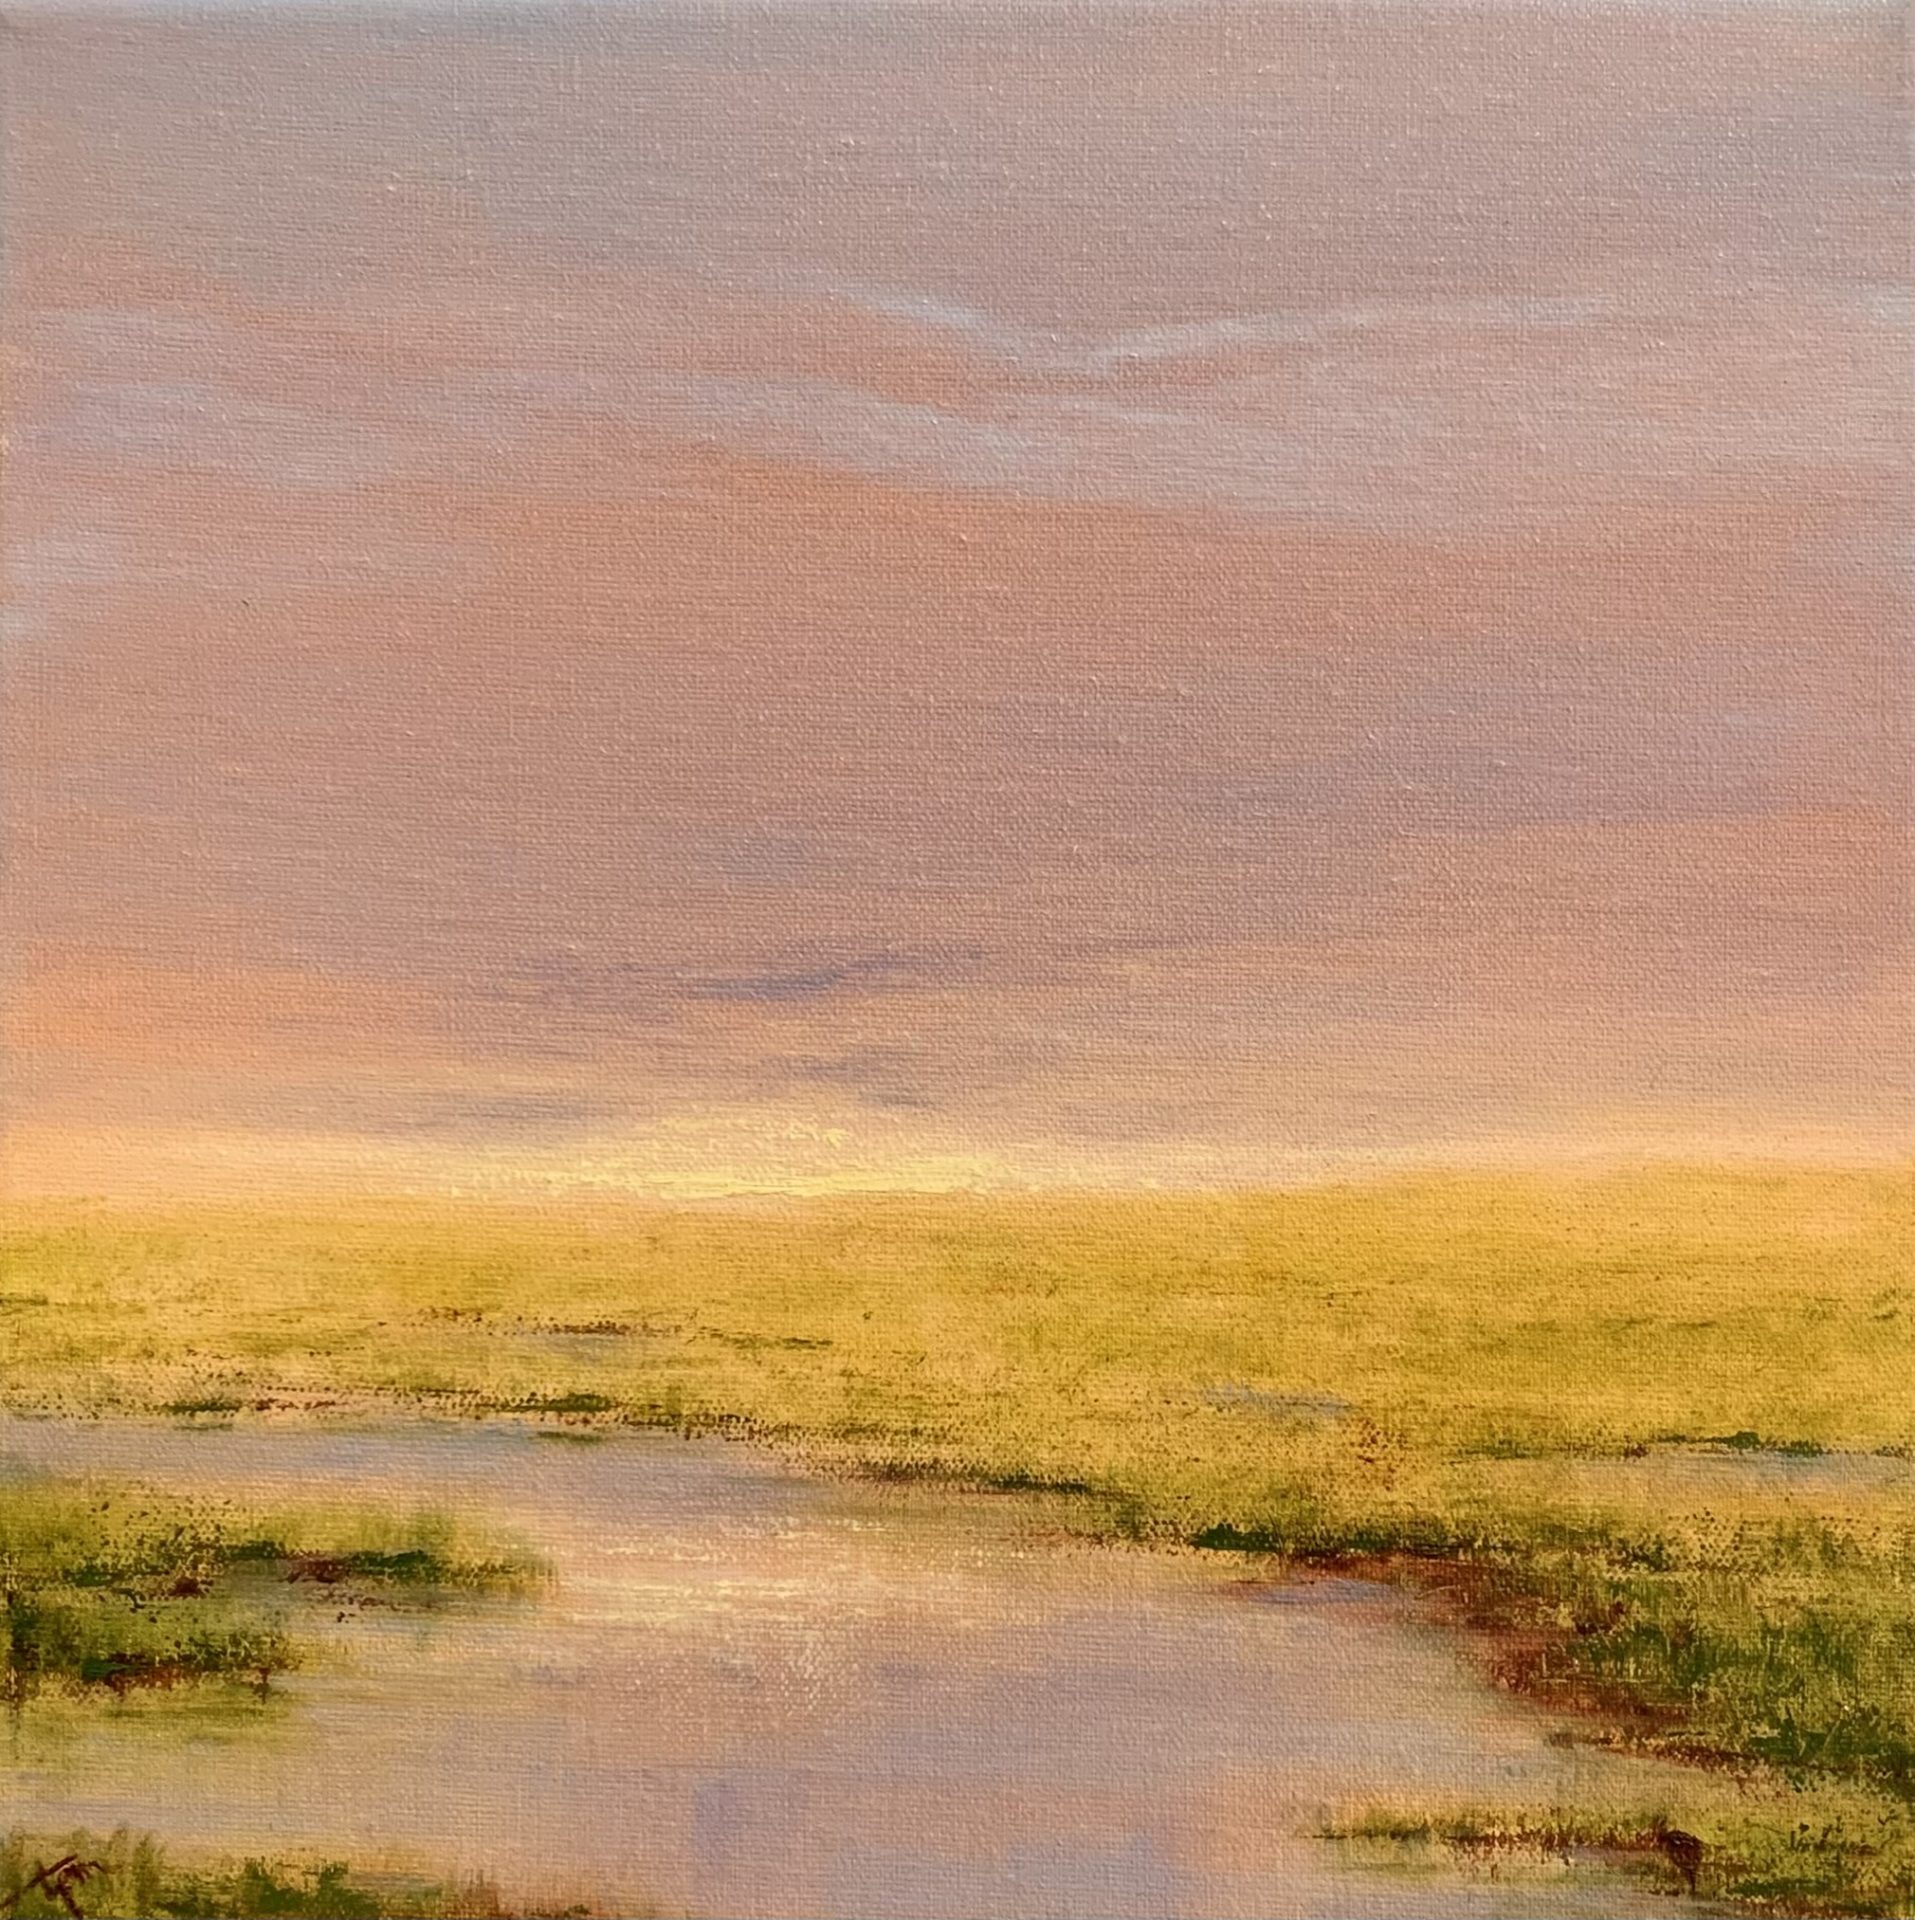 Original landscape oil painting by Tisha Mark, Sweet Summer Mornings (Week 34, 52 Weeks of Finding Light Series), 10"x10" oil on linen stretched canvas (2023). A late summer marshy landscape underneath a soft, orange and lavender sunrise sky.